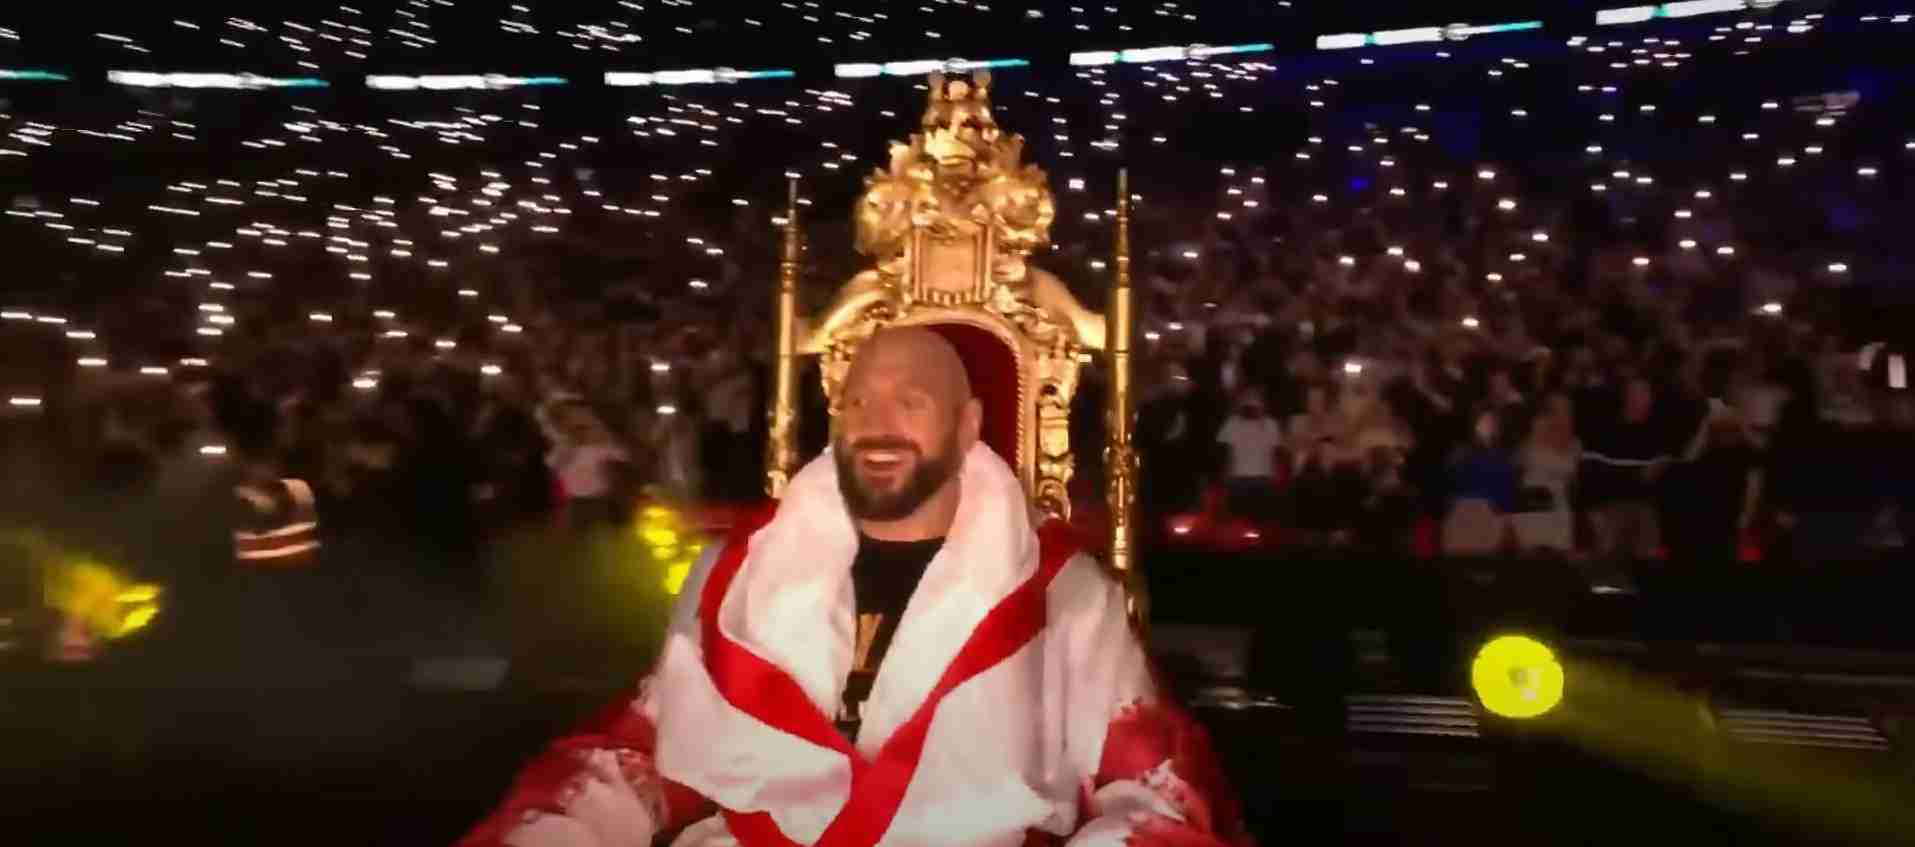 Boxing World Reacts To Tyson Fury Knockout Triumph